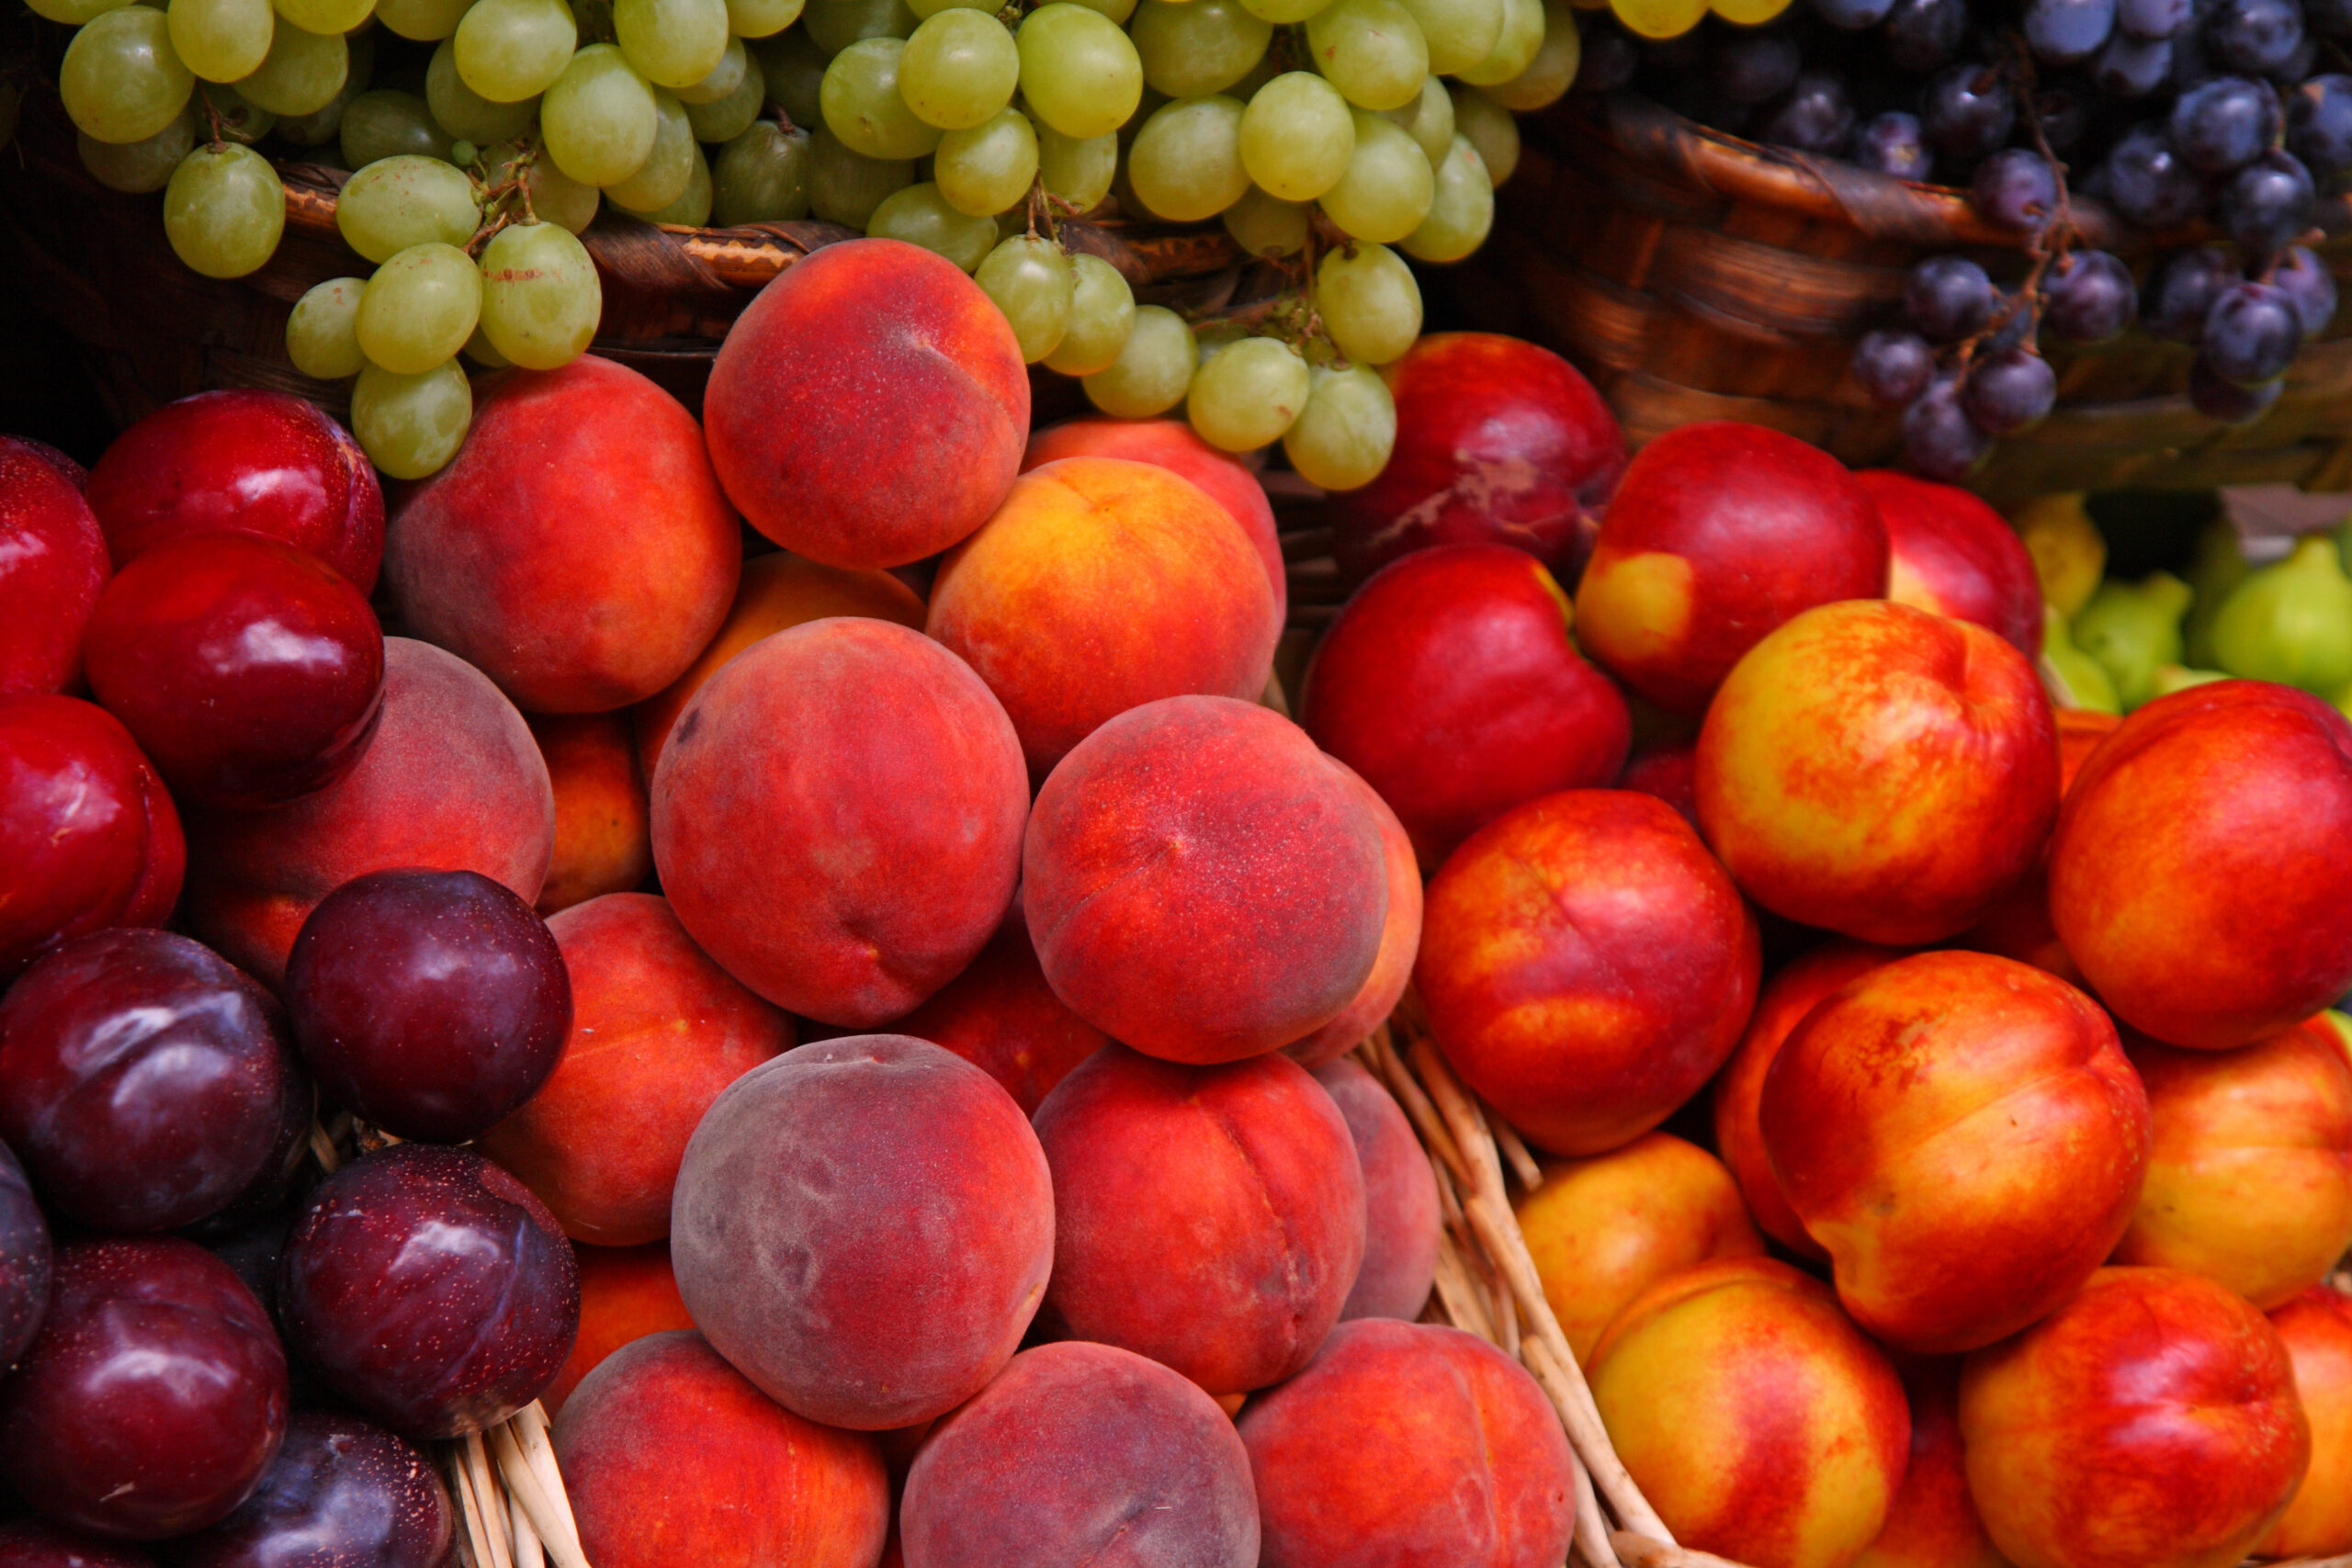 Nectarines, plums, peaches and green and red grapes at an Italian market stall.